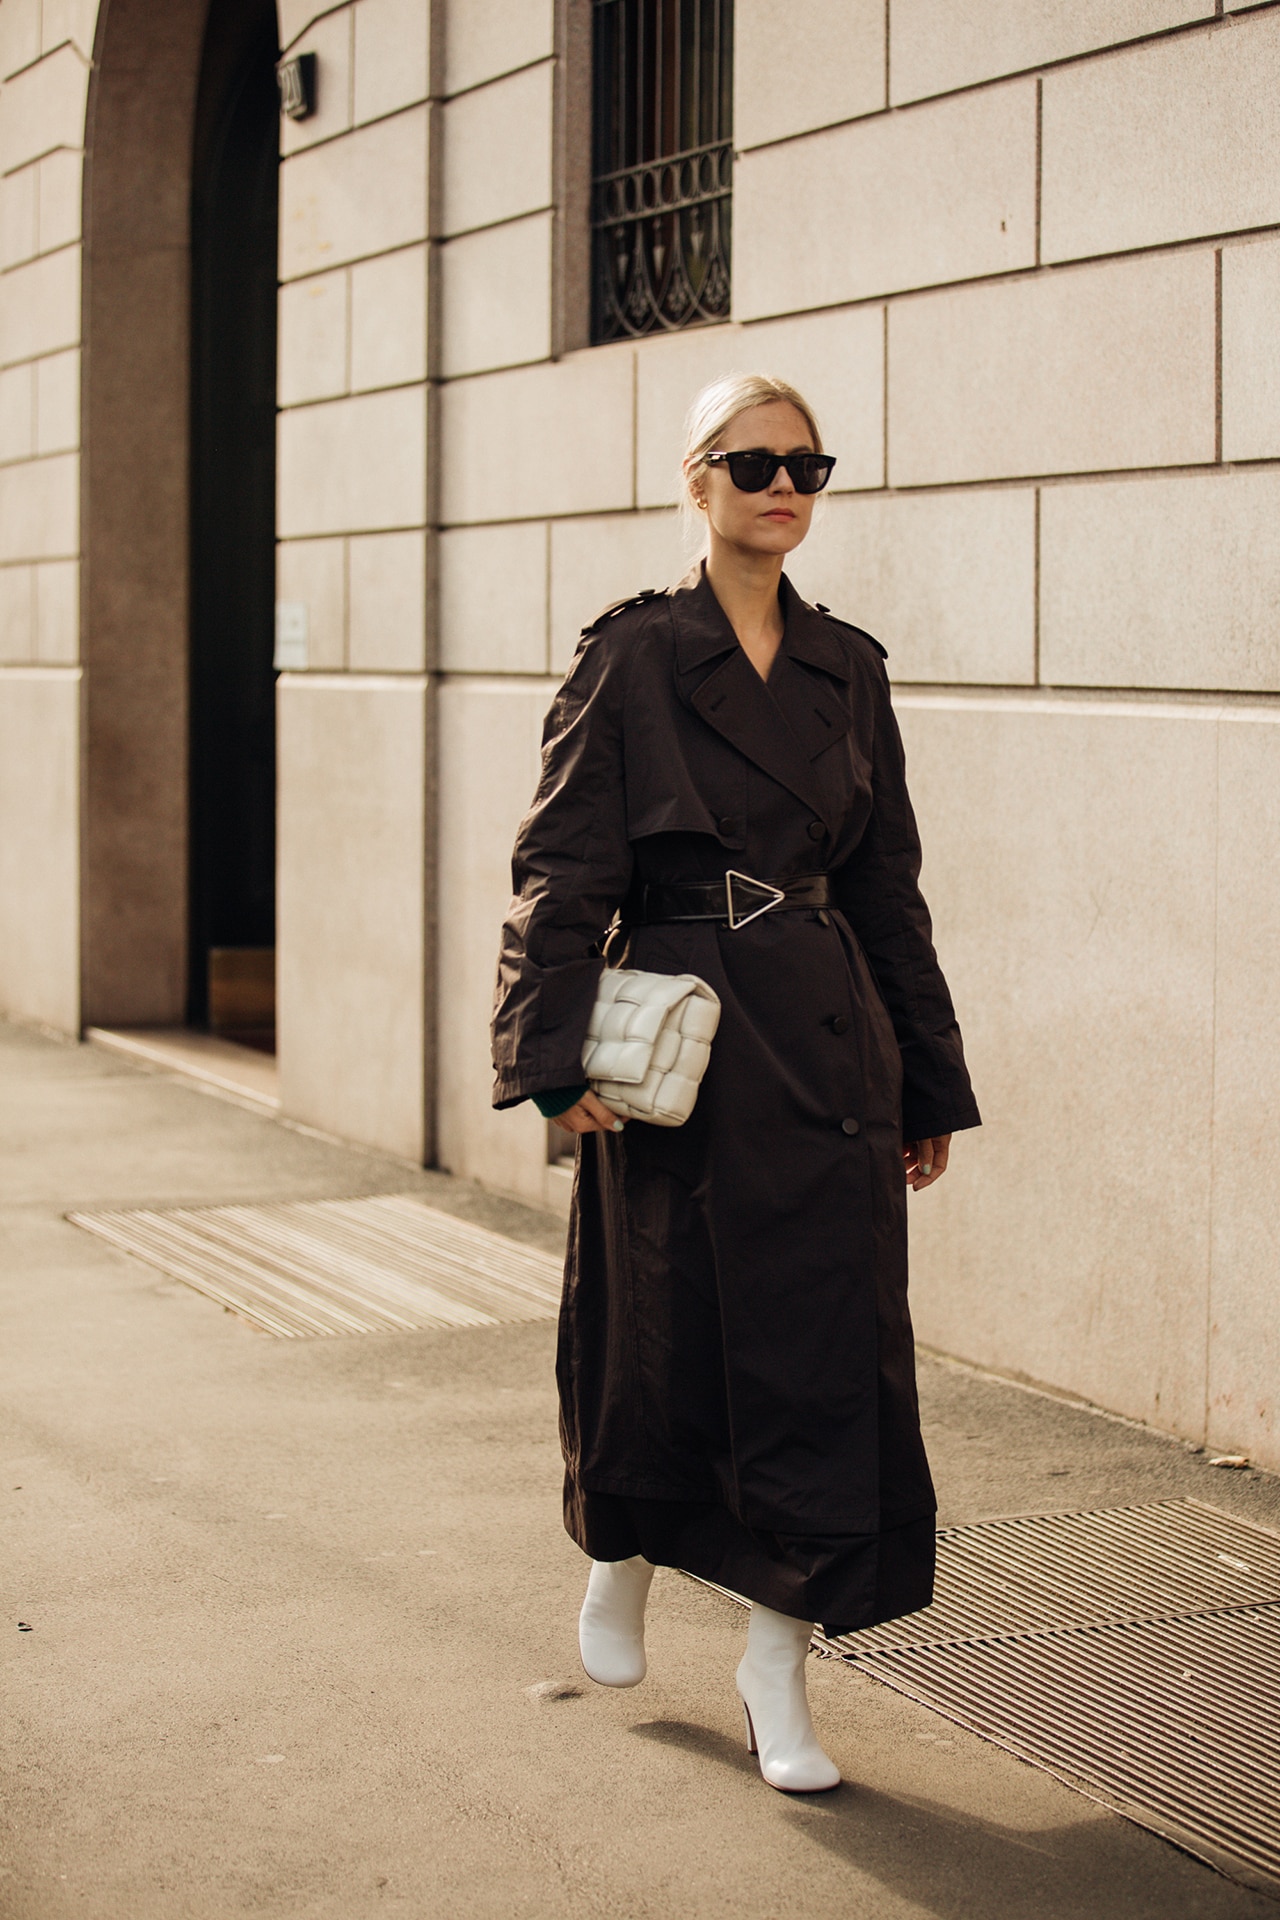 5 Different Ways to Style a Trench Coat